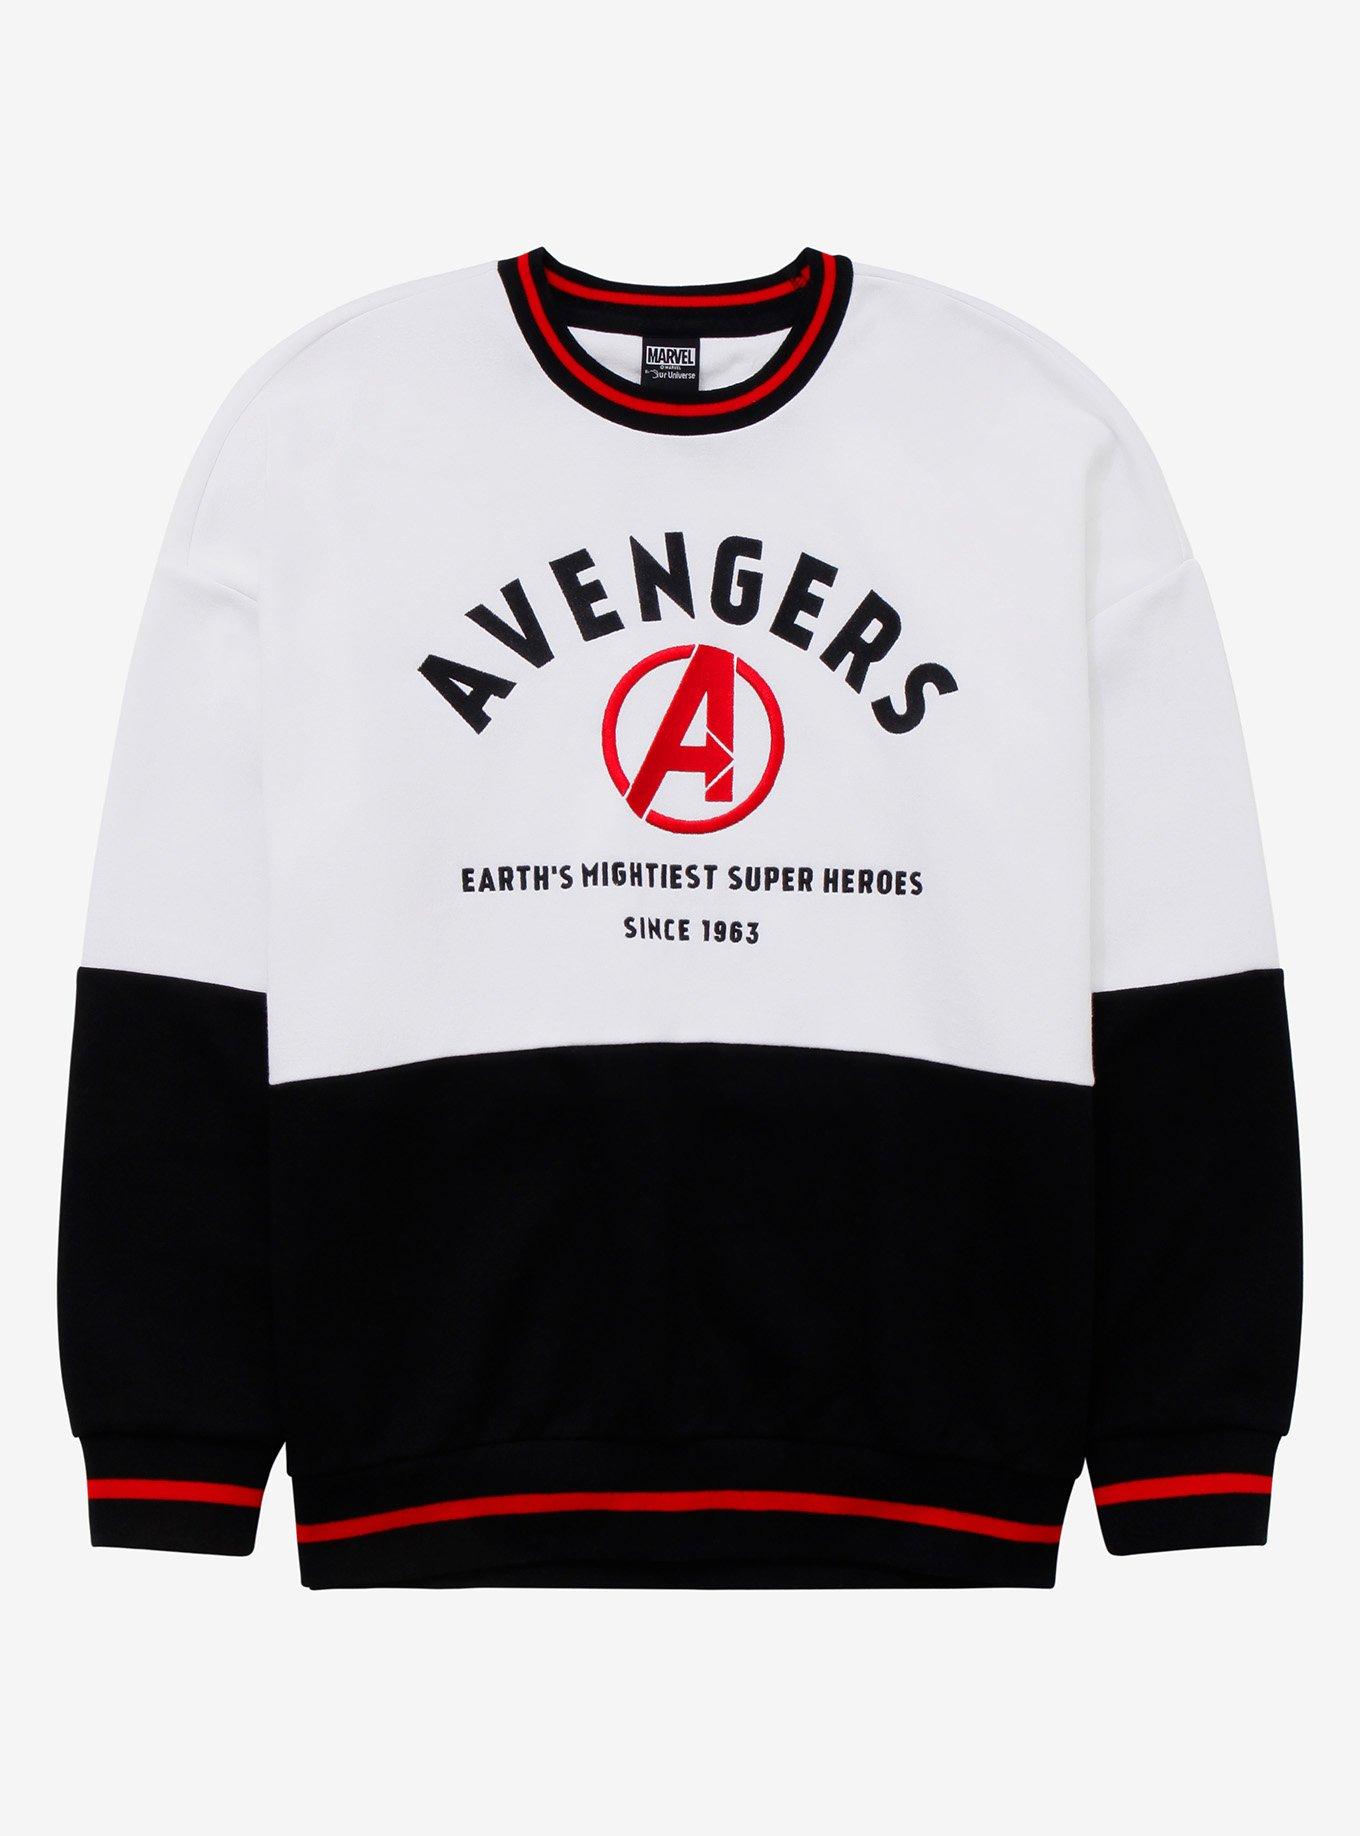 BoxLunch - Two-Tone Exclusive Crewneck BoxLunch Marvel Avengers |